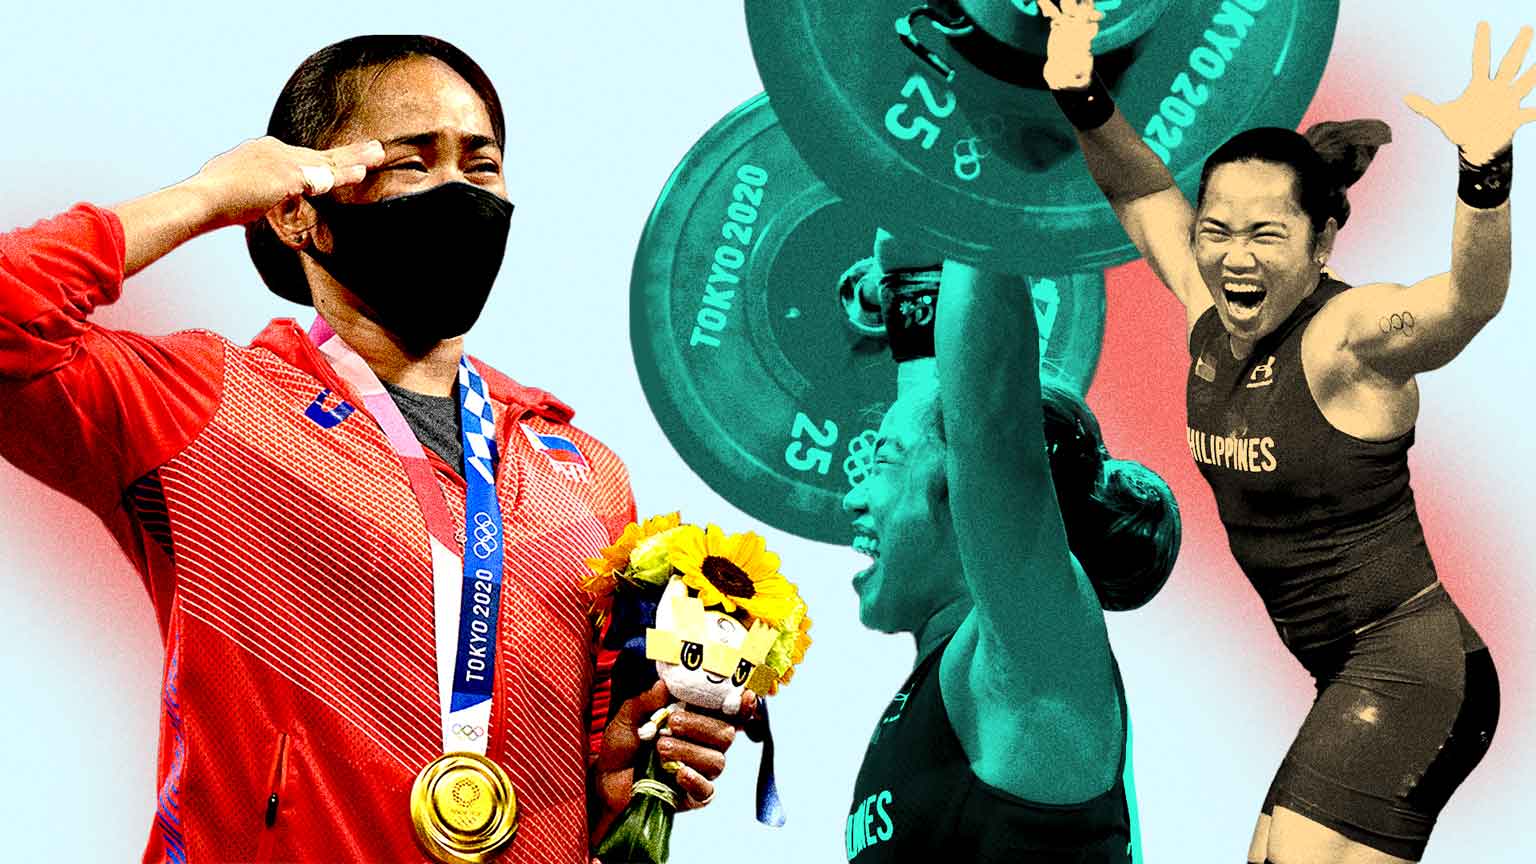 What The Historic Tokyo Olympics 2020 Win Means For Hidilyn Diaz